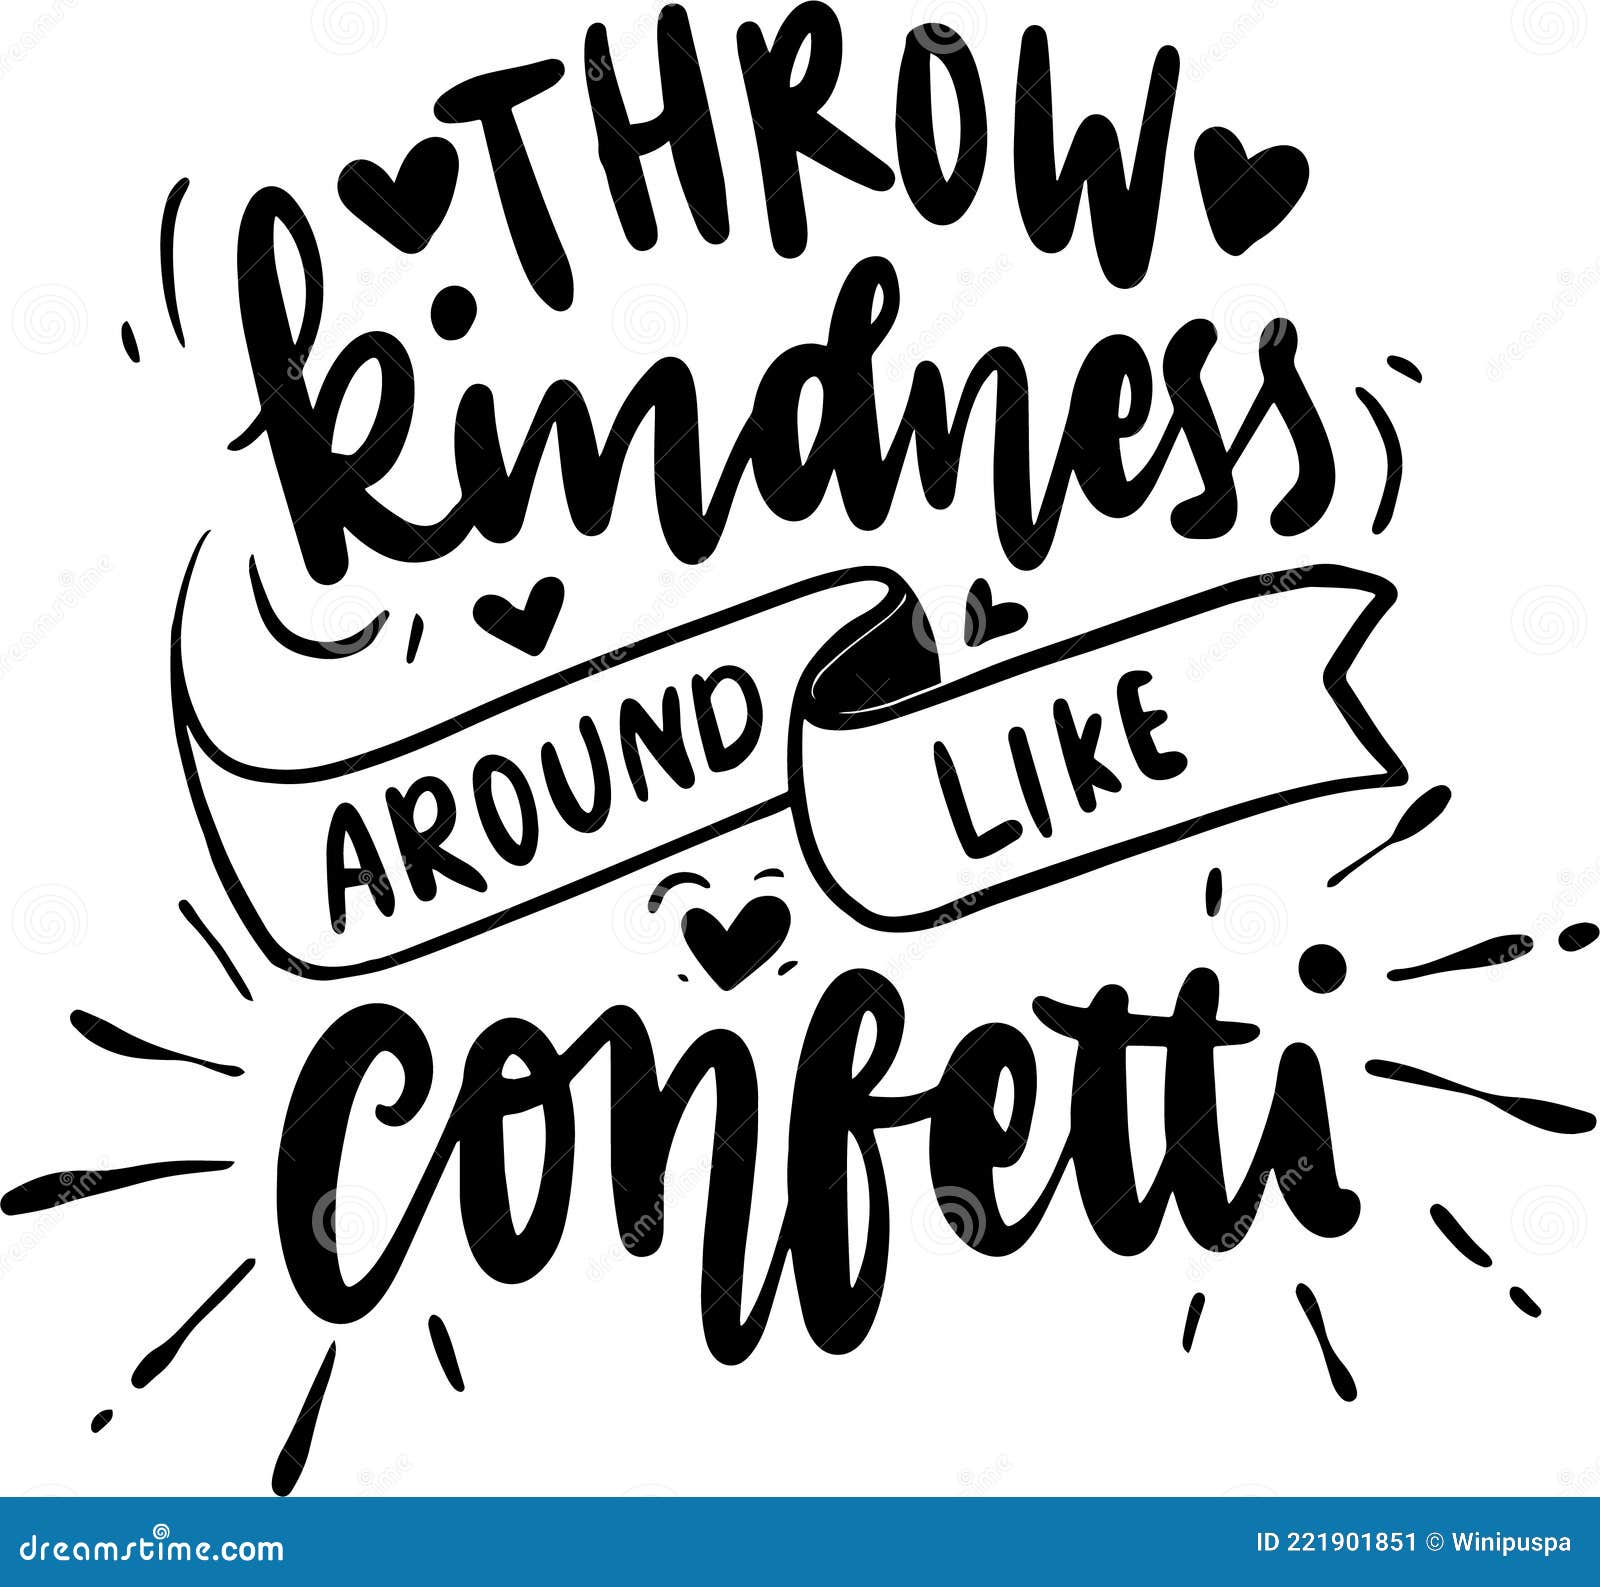 throw kindness around like confetti stock vector illustration of abstract inspiration 221901851